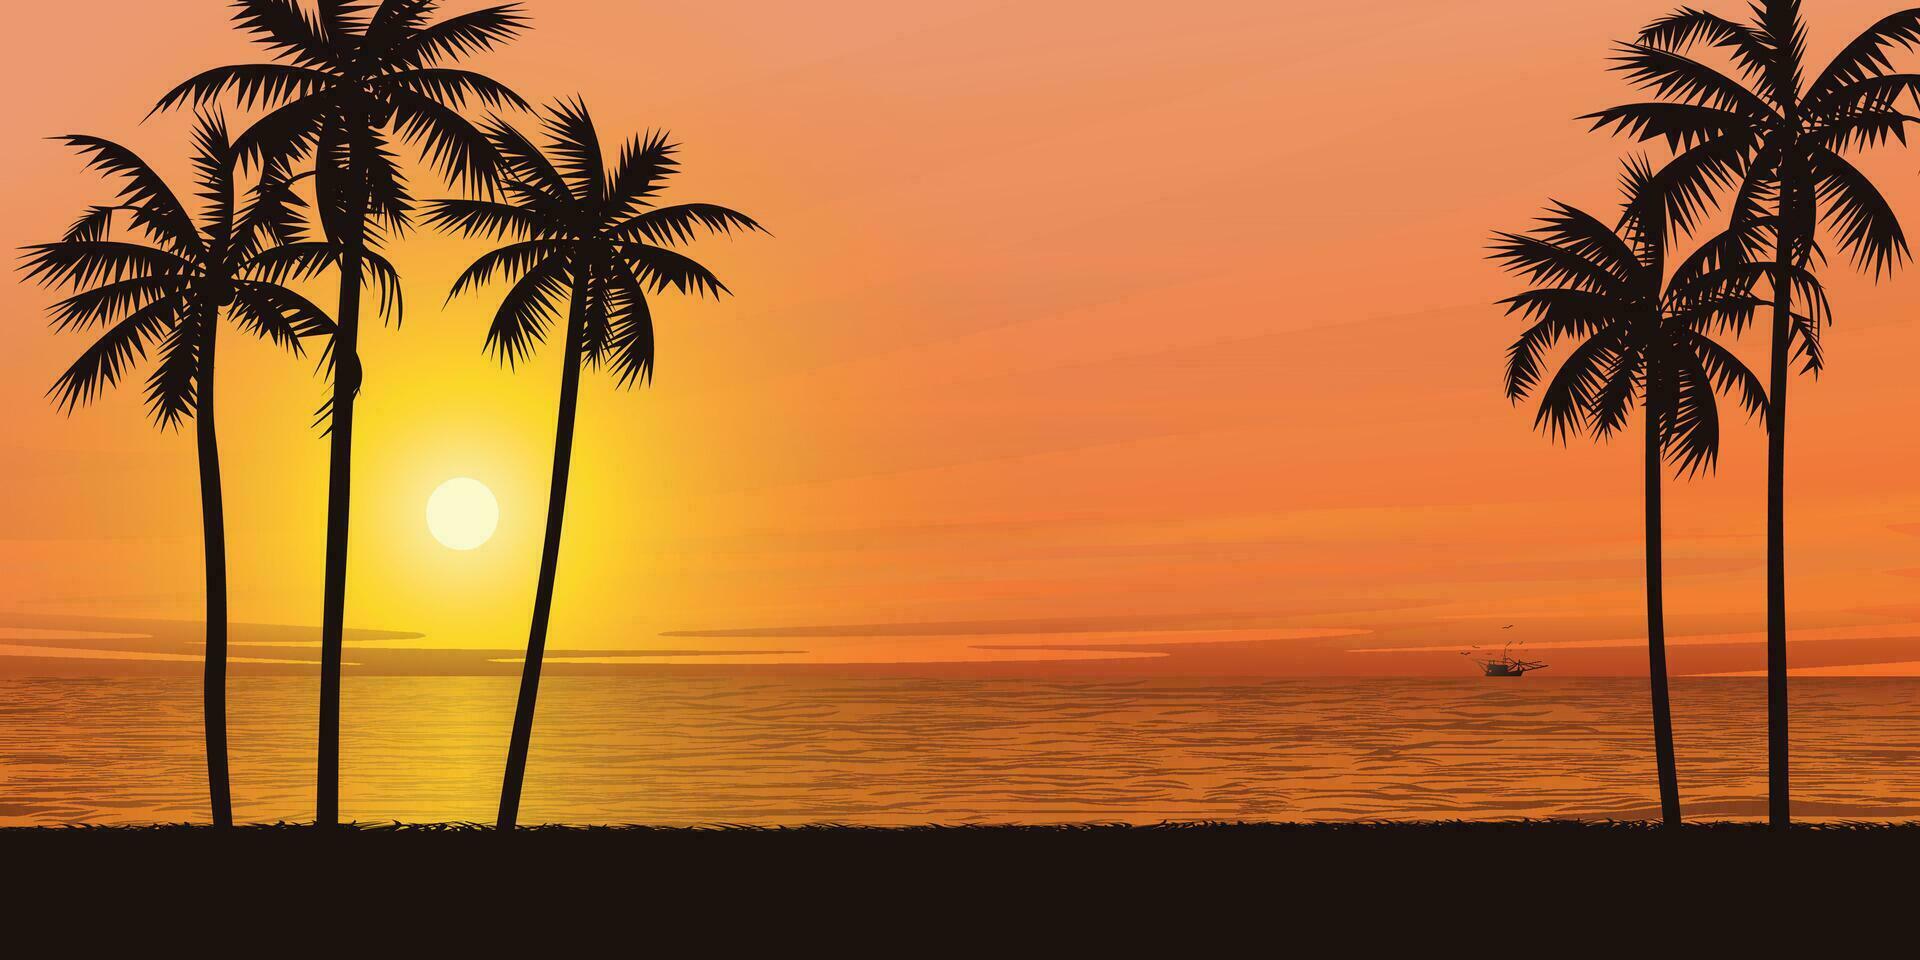 Silhouette of palm tree at seaside with sunset background vector illustration. Tropical island concept flat design template have blank space.